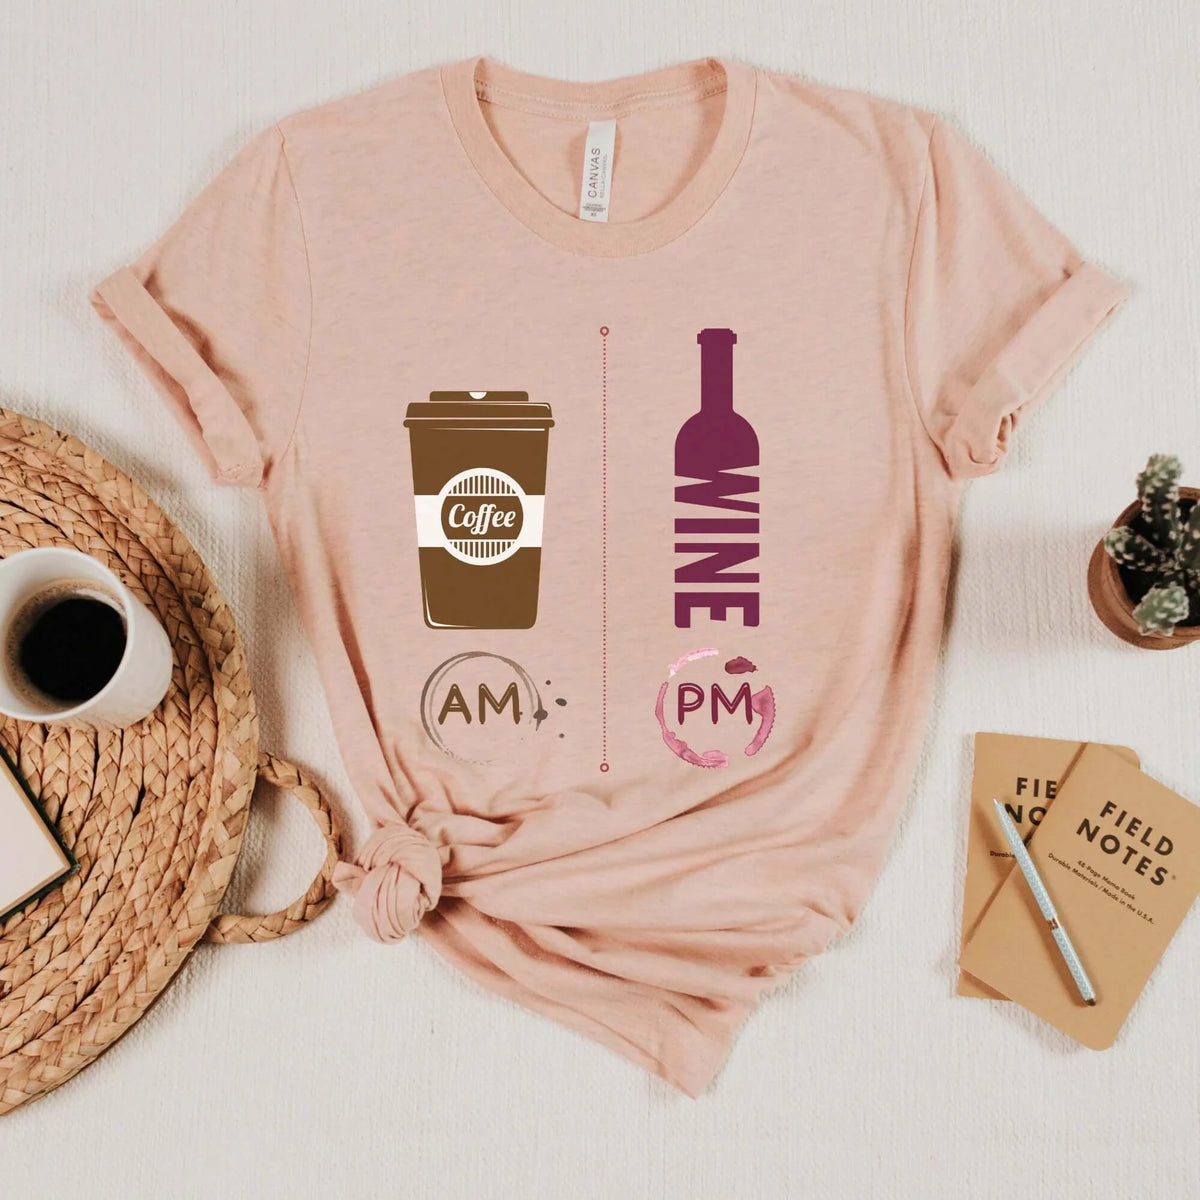 Coffee AM Wine PM, Wine Shirt, Wine Lover Shirt, Coffee T-Shirt, Workout Shirt, Gift for Friend, Funny, Party Tees, Wine, Coffee Gift Idea